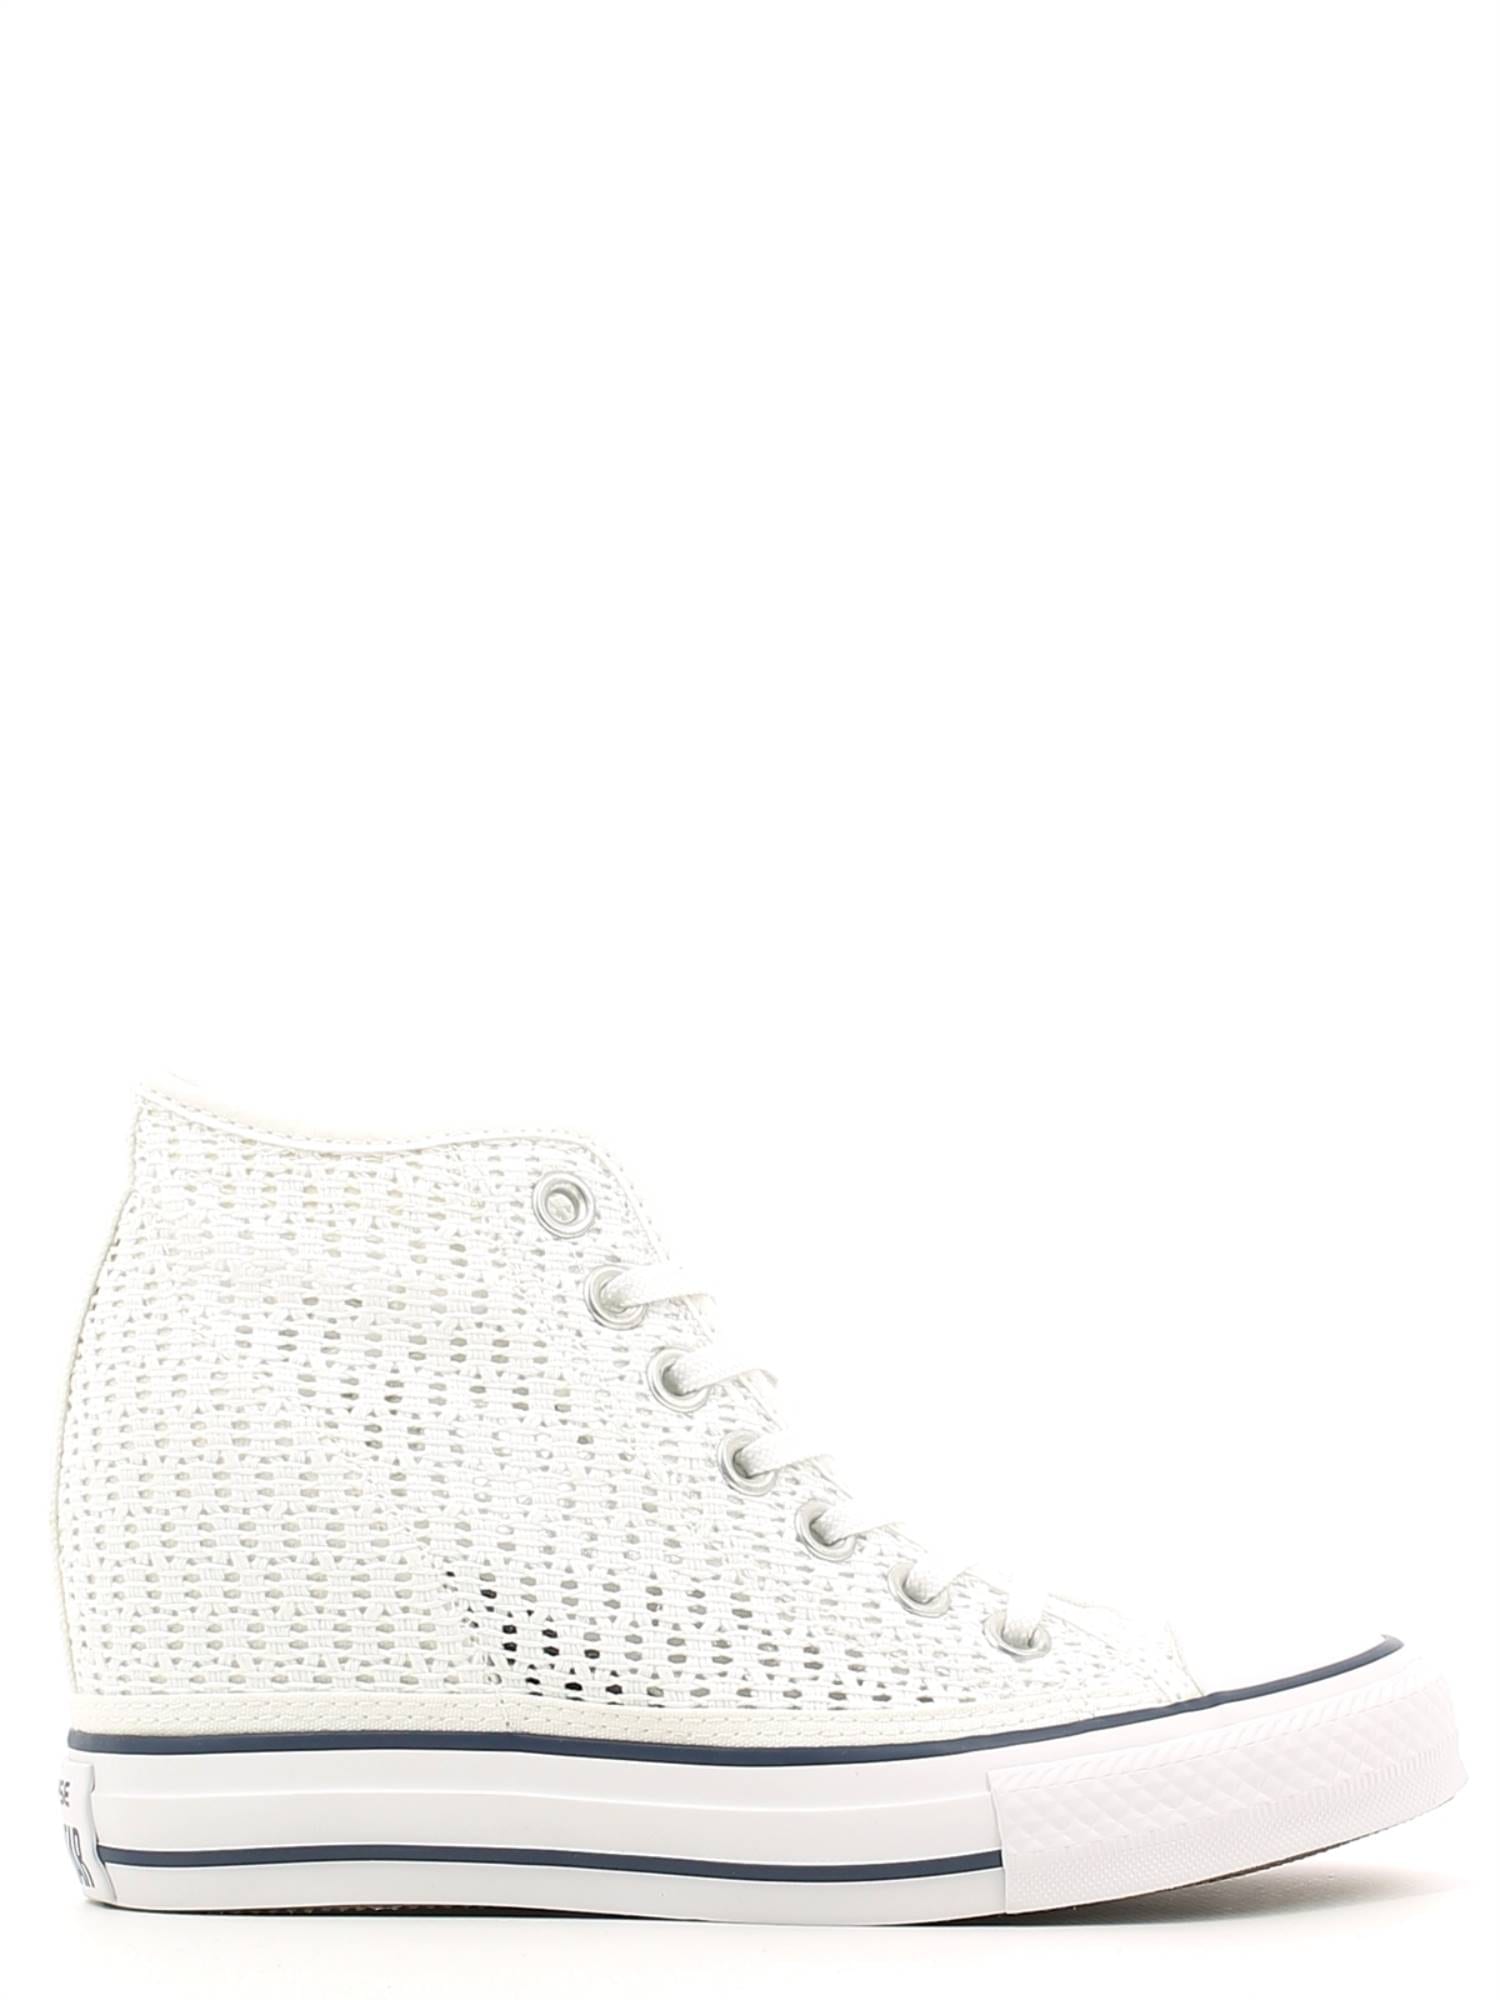 converse all star mid lux